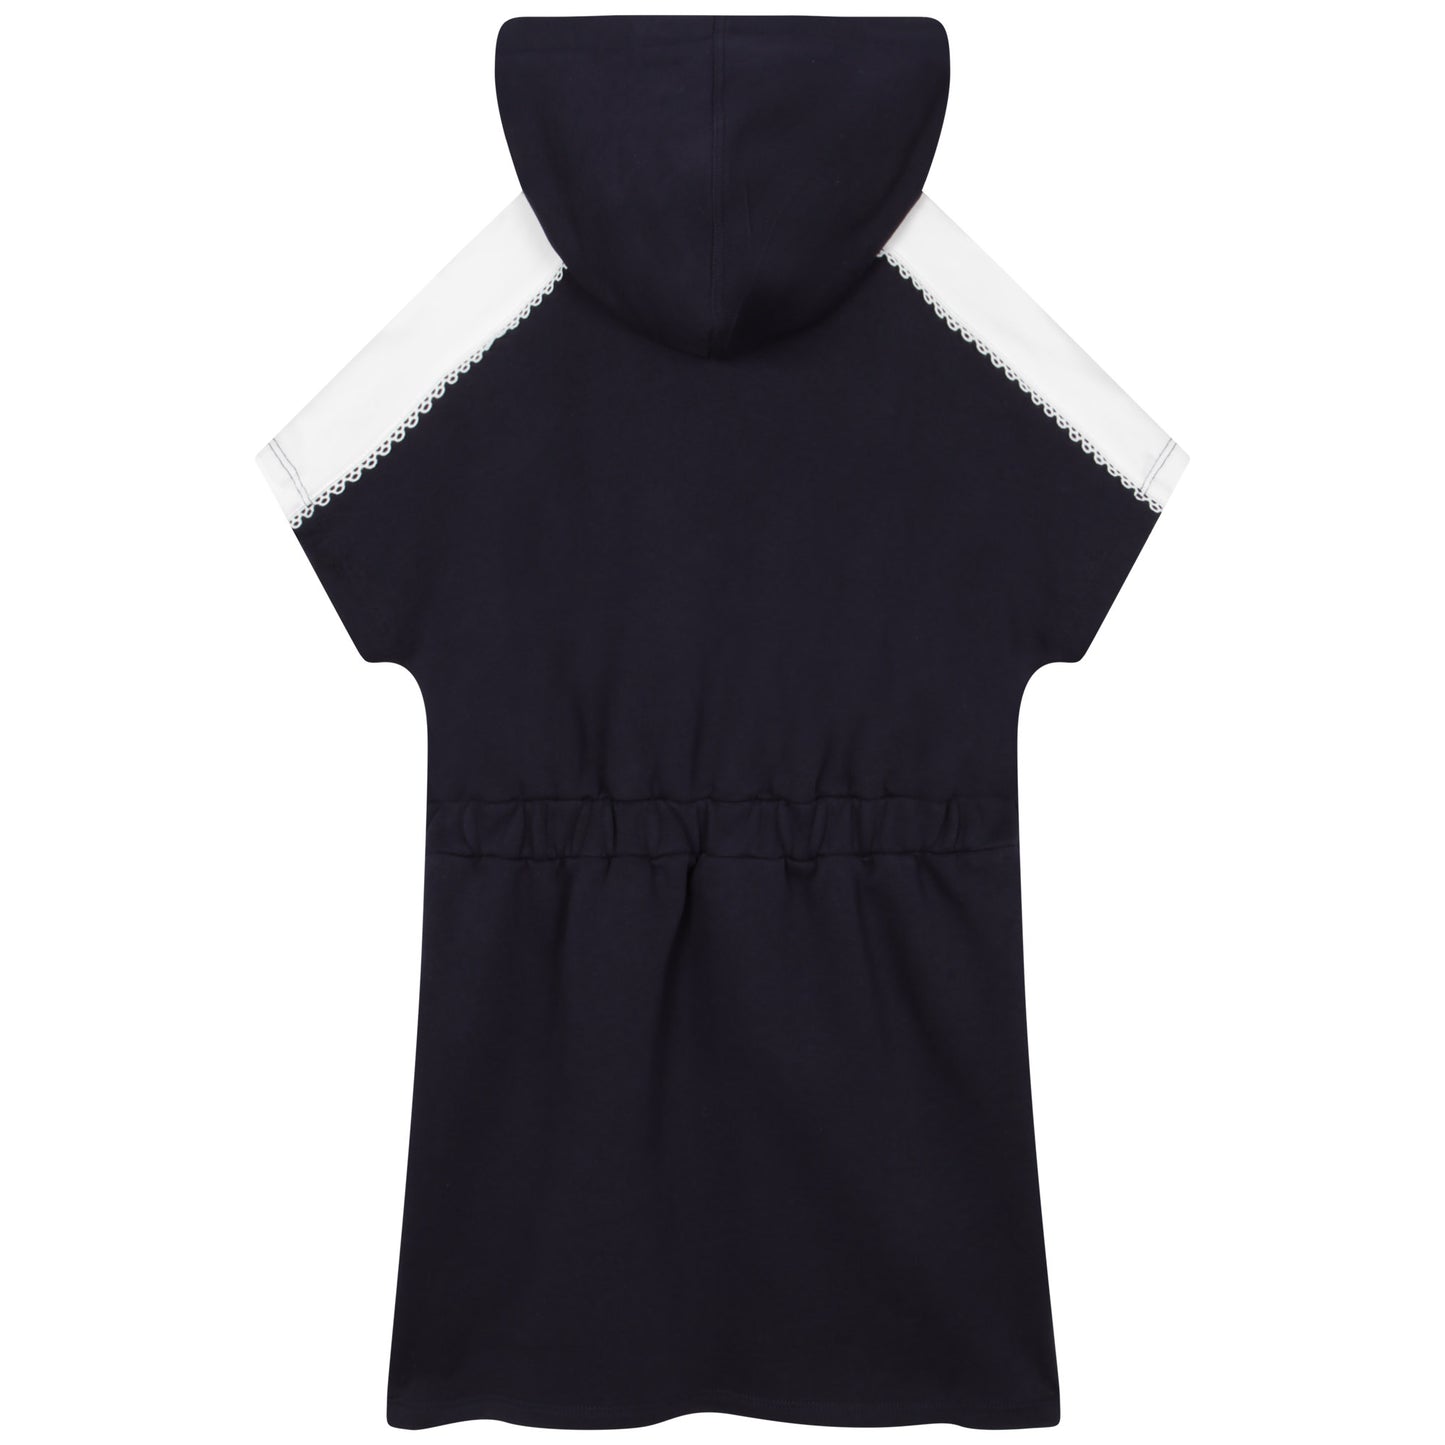 Chloe Short Sleeved Hooded Dress w/ Front Bow